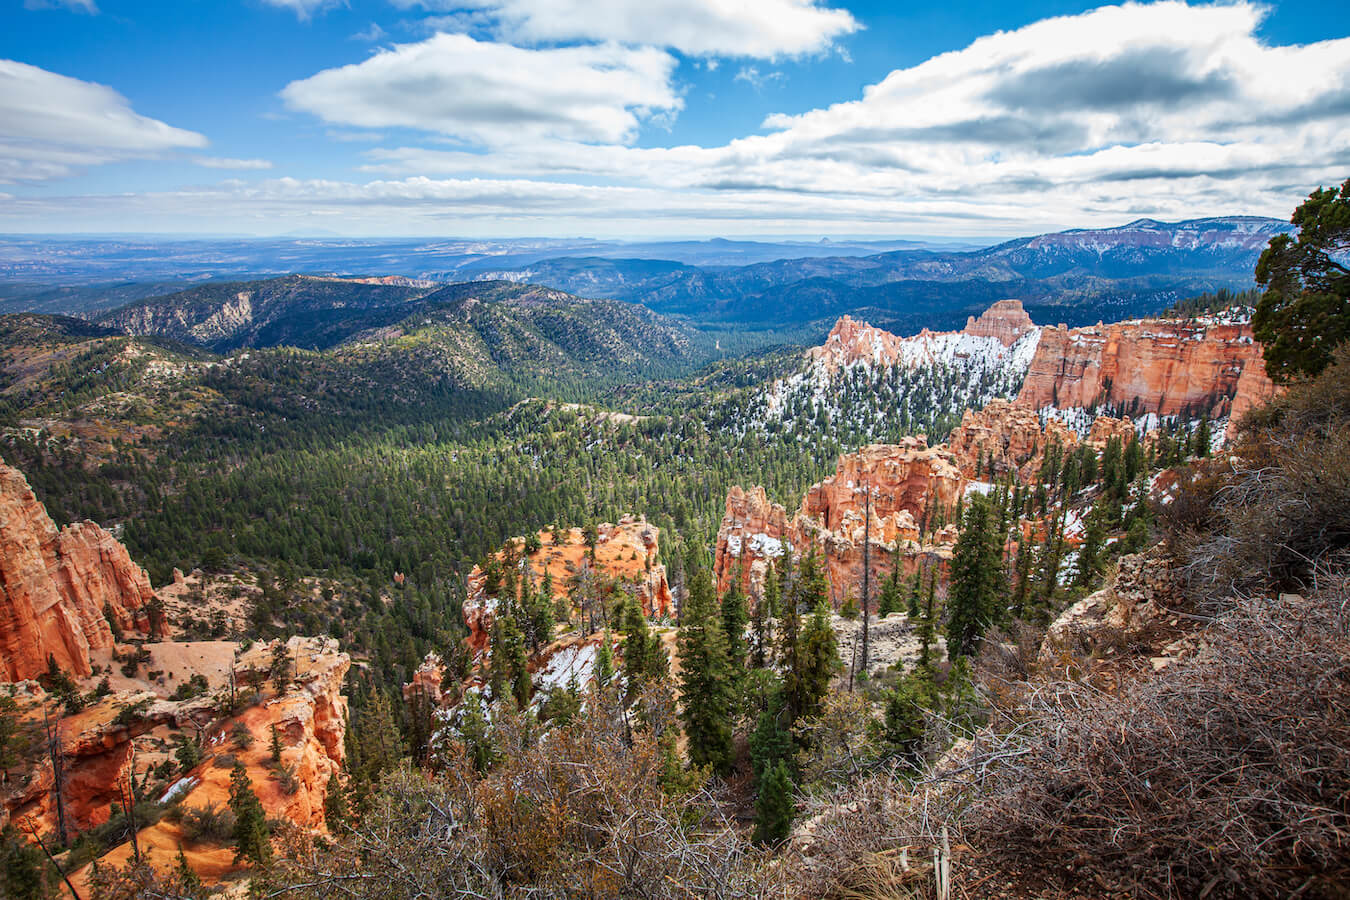 Farview Point, Bryce Canyon National Park, Utah | Photo Credit: Vezzani Photography